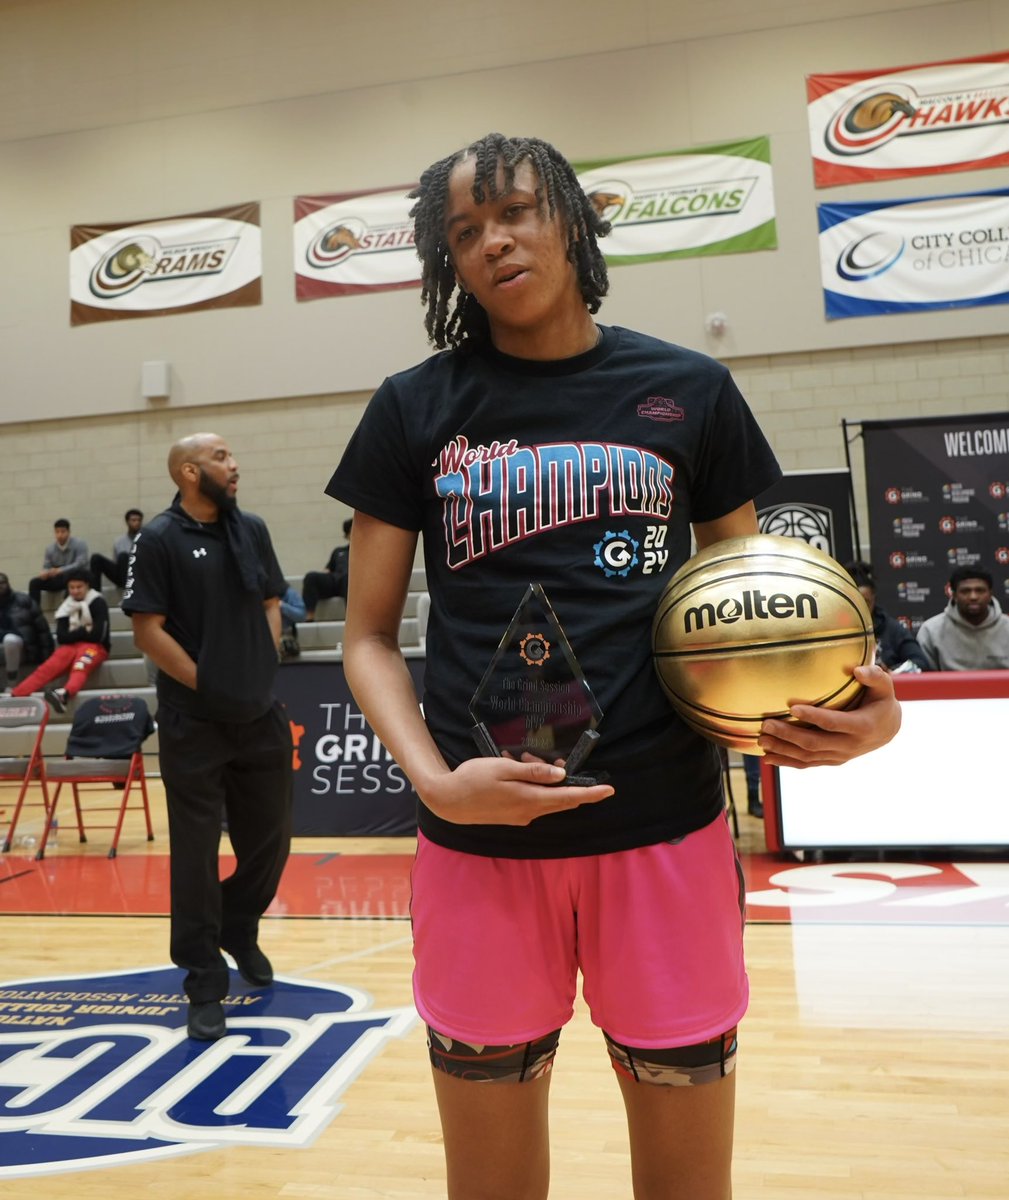 Congratulations to 2024 Penn State Commit Ariana Williams on receiving the Grind Session World Championship Game MVP Award and All Star nomination!!! 🦅 #AcademyBusiness